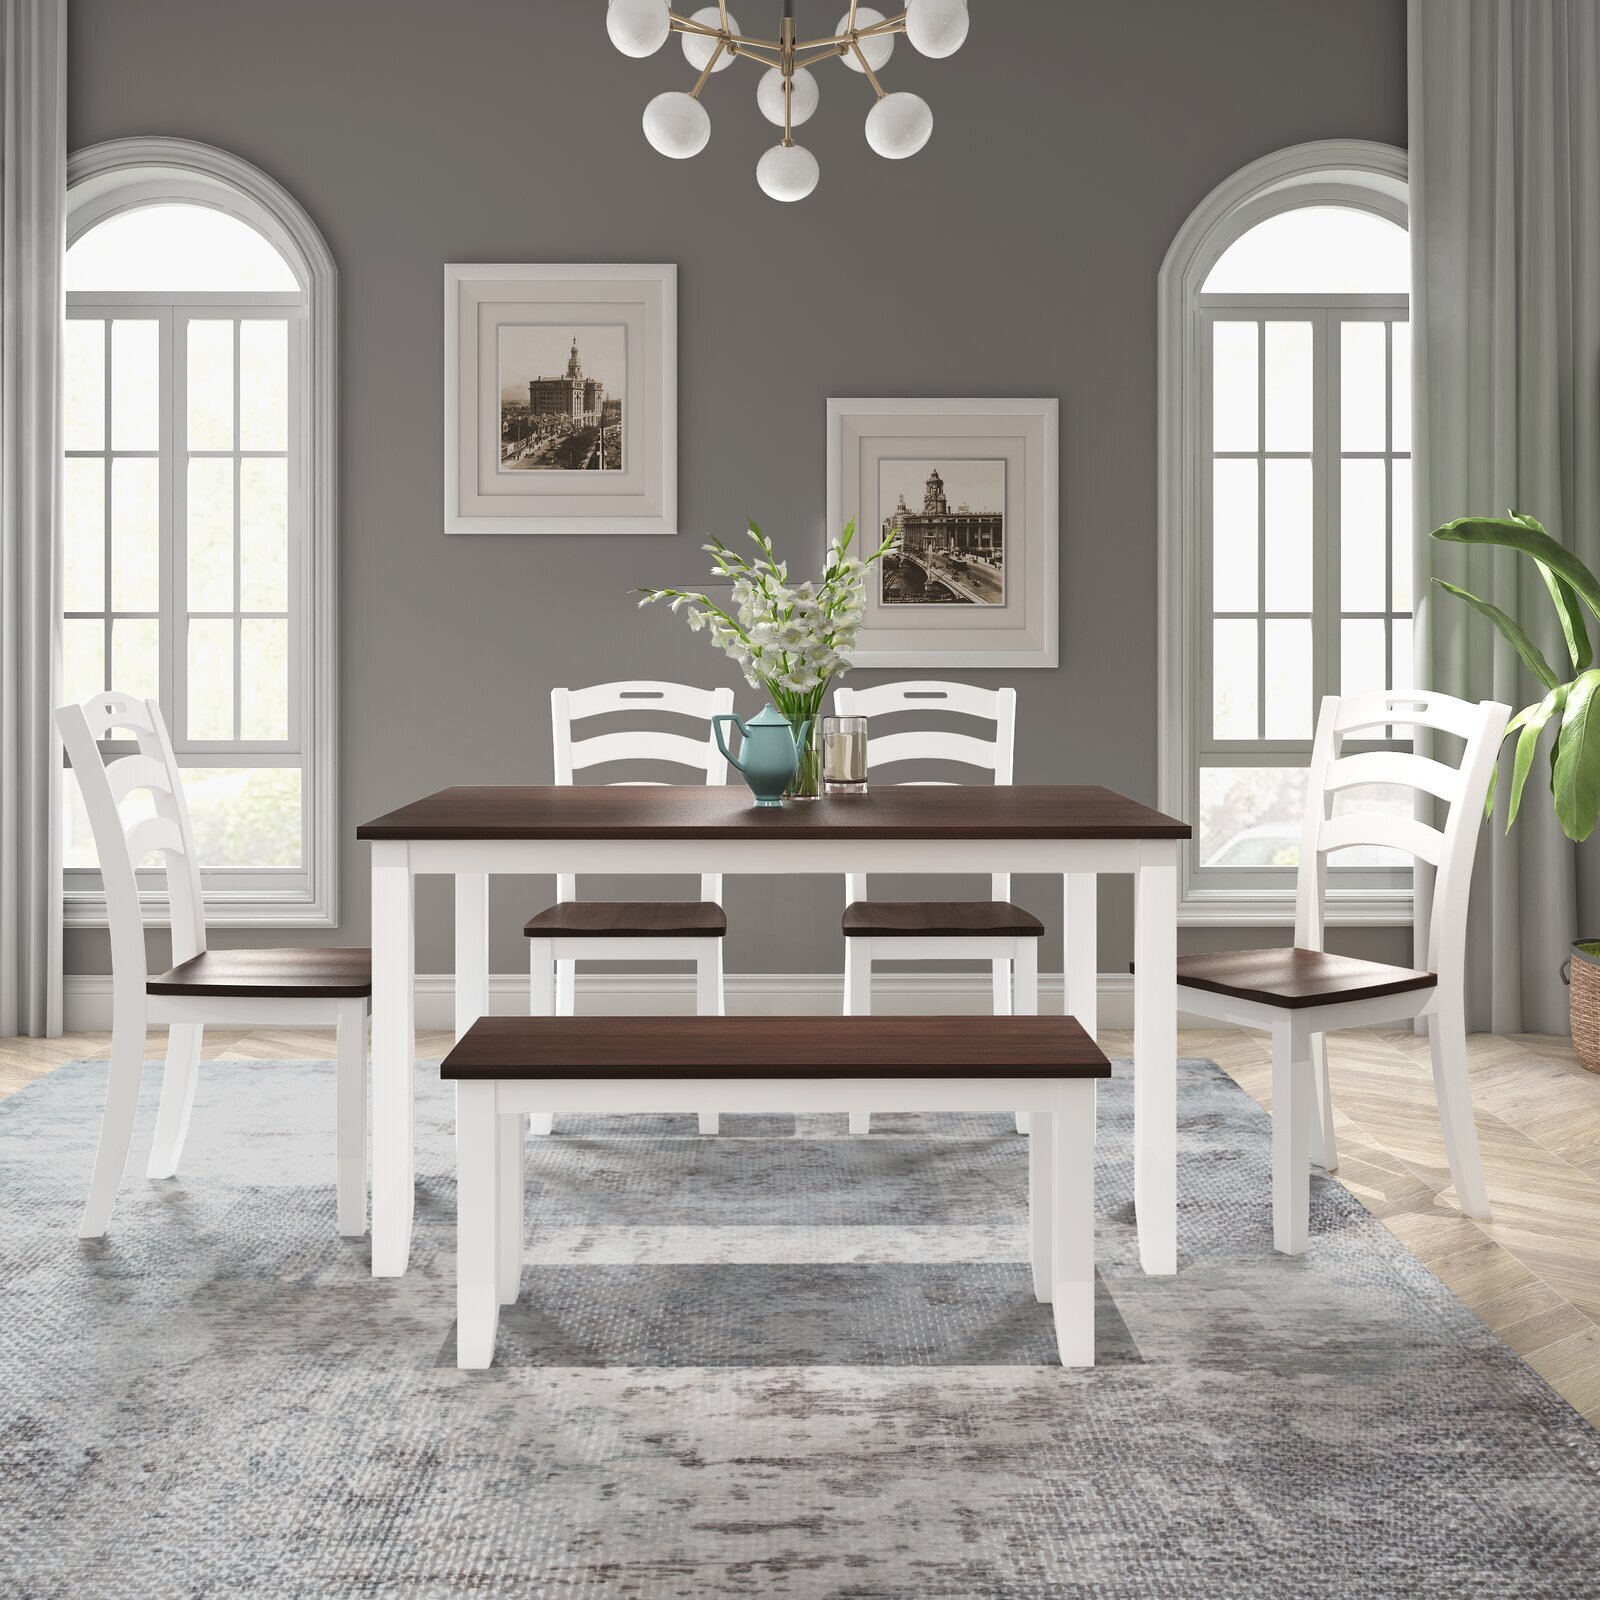 Classic Style Dining Sets with Chairs and Bench